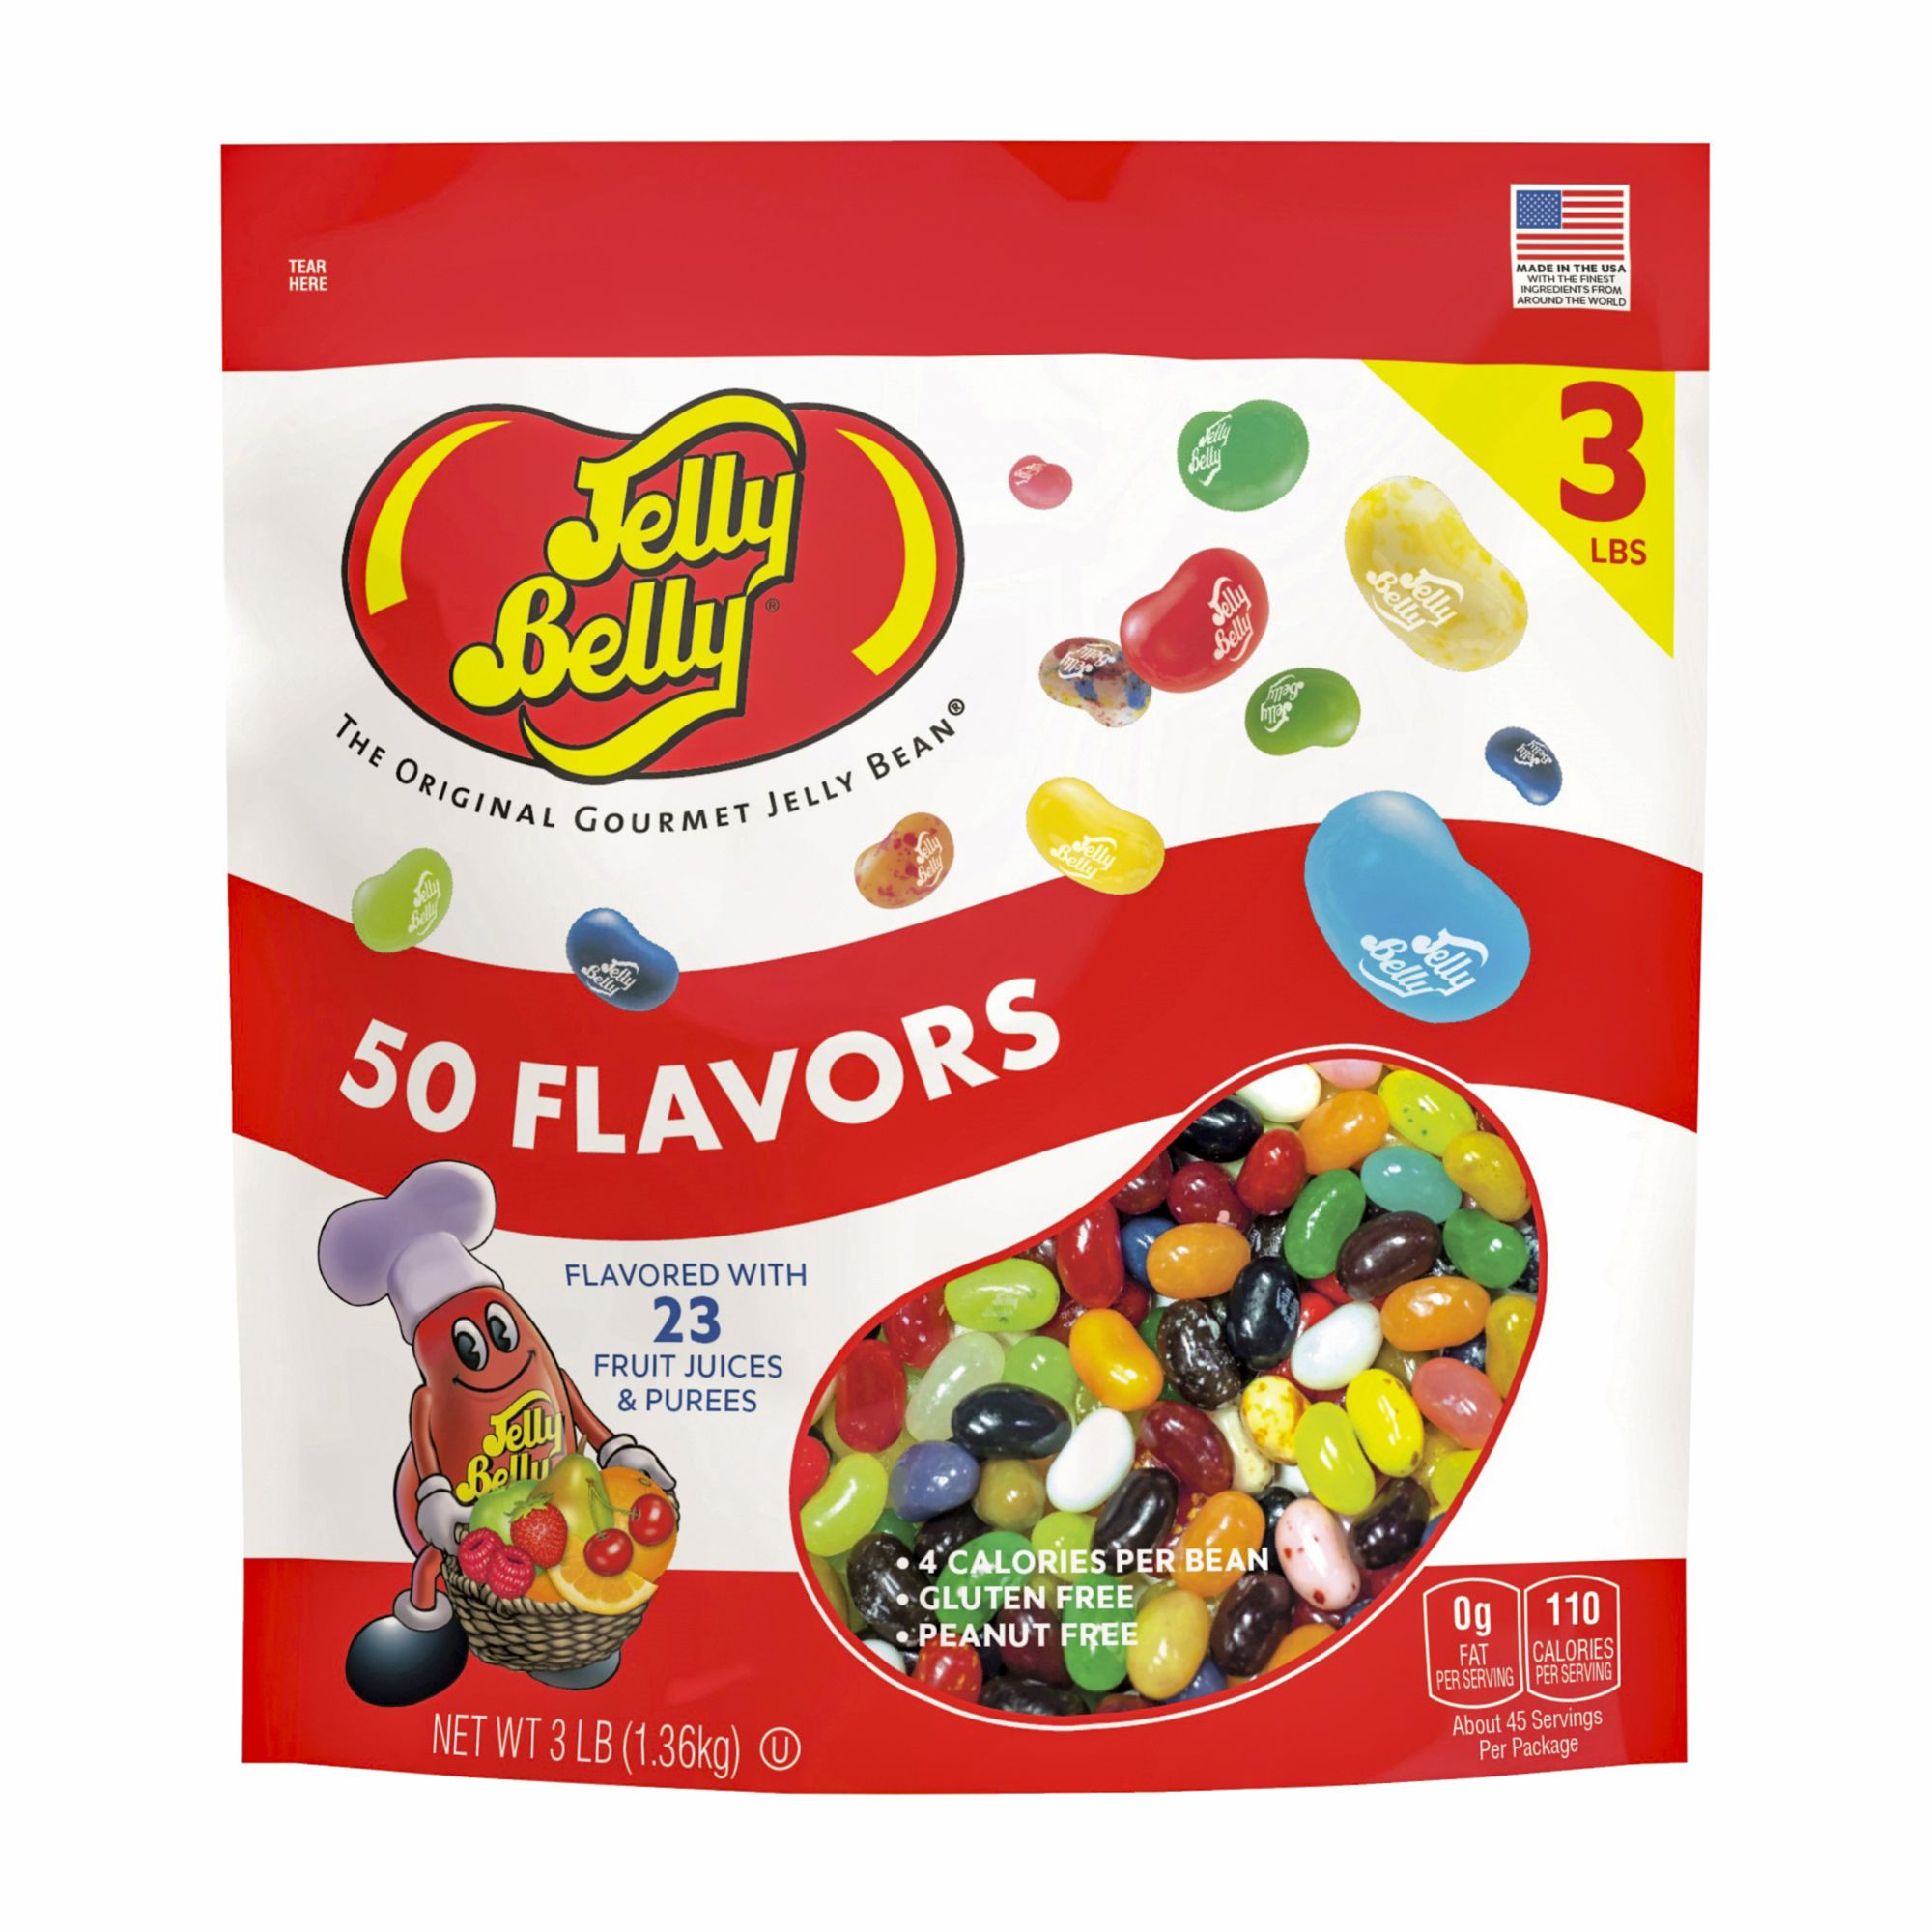 are black jelly beans gluten free